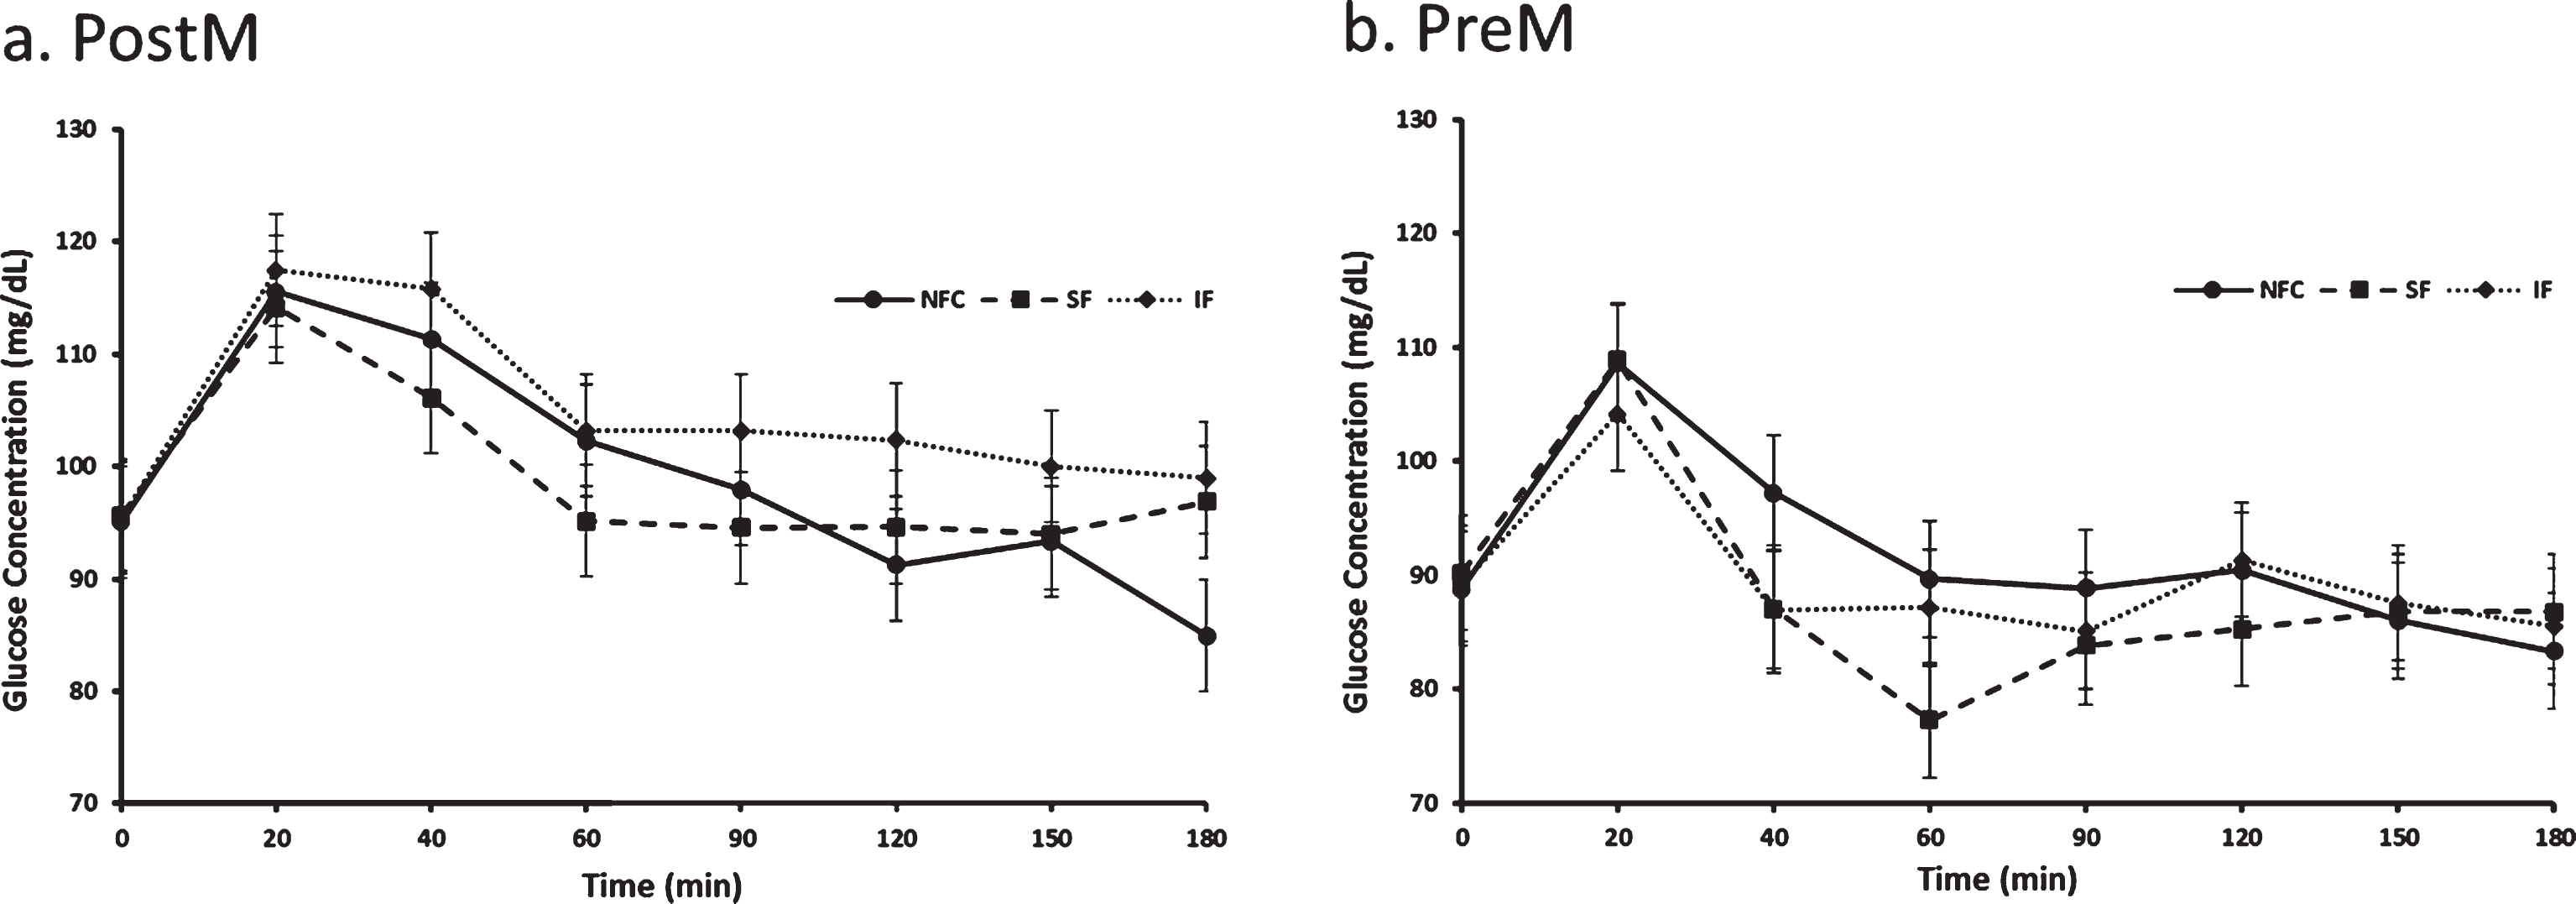 Variation of glucose responses to NFC-No Fiber Control, IF-Insoluble Fiber, SF-Soluble Fiber meals in Postmenopausal (PostM, n = 10) and Premenopausal (PreM, n = 9) women (Fig. 6a and b, respectively). Values are the means±SEM at each time point. Different letters at the same time point denotes significant difference, p < 0.05.